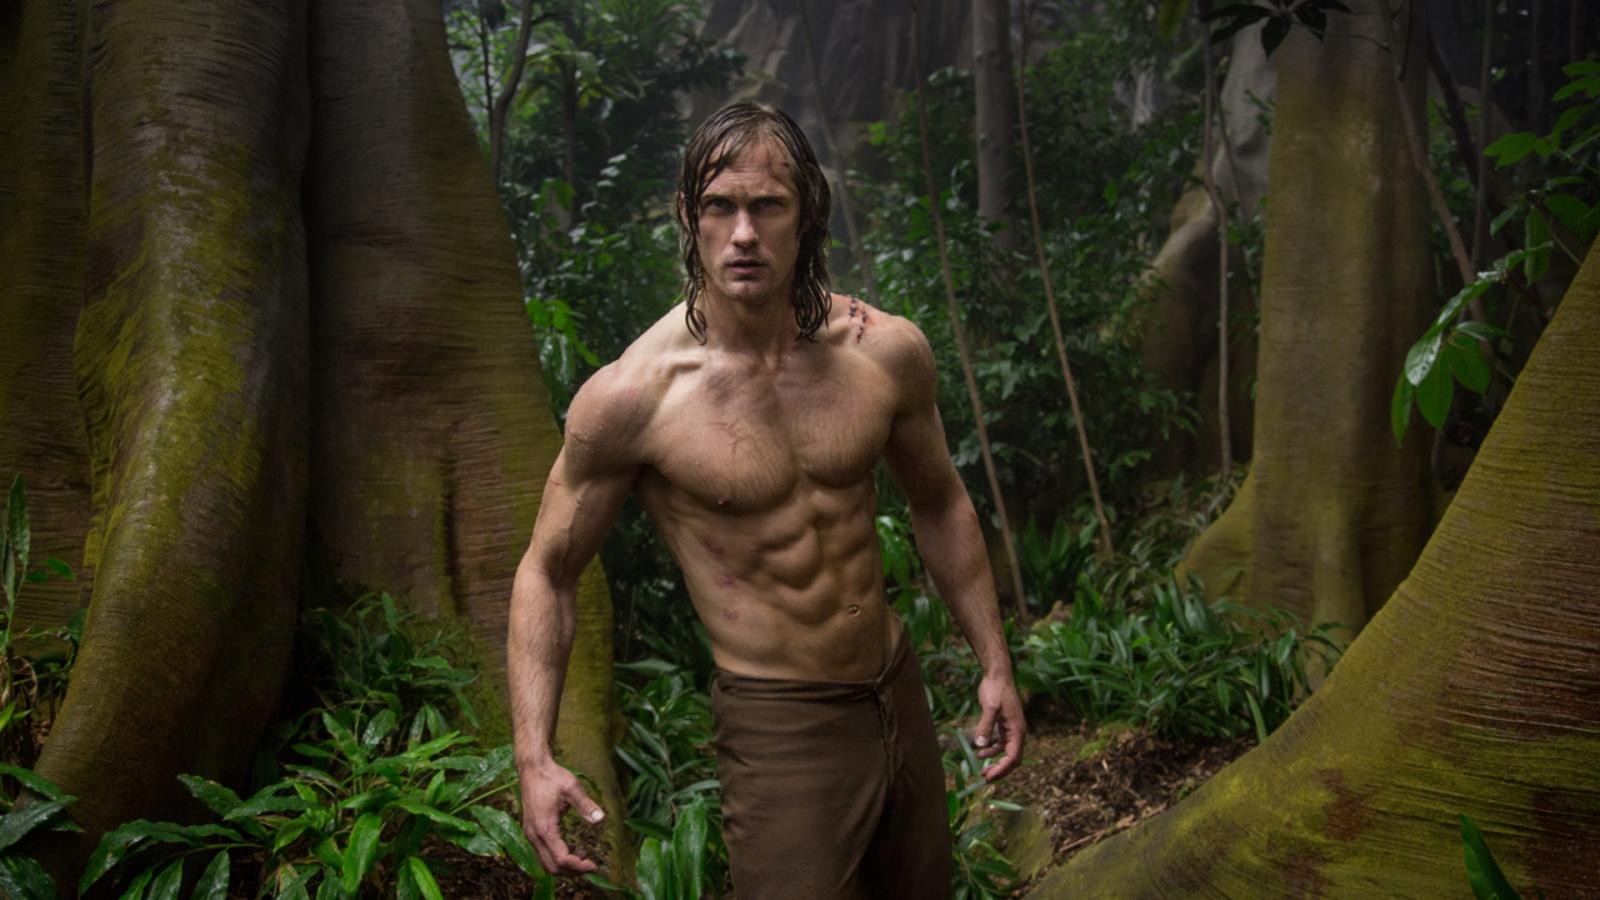 Remembering the 10 Most Pointless Shirtless Scenes in Film History - image 6